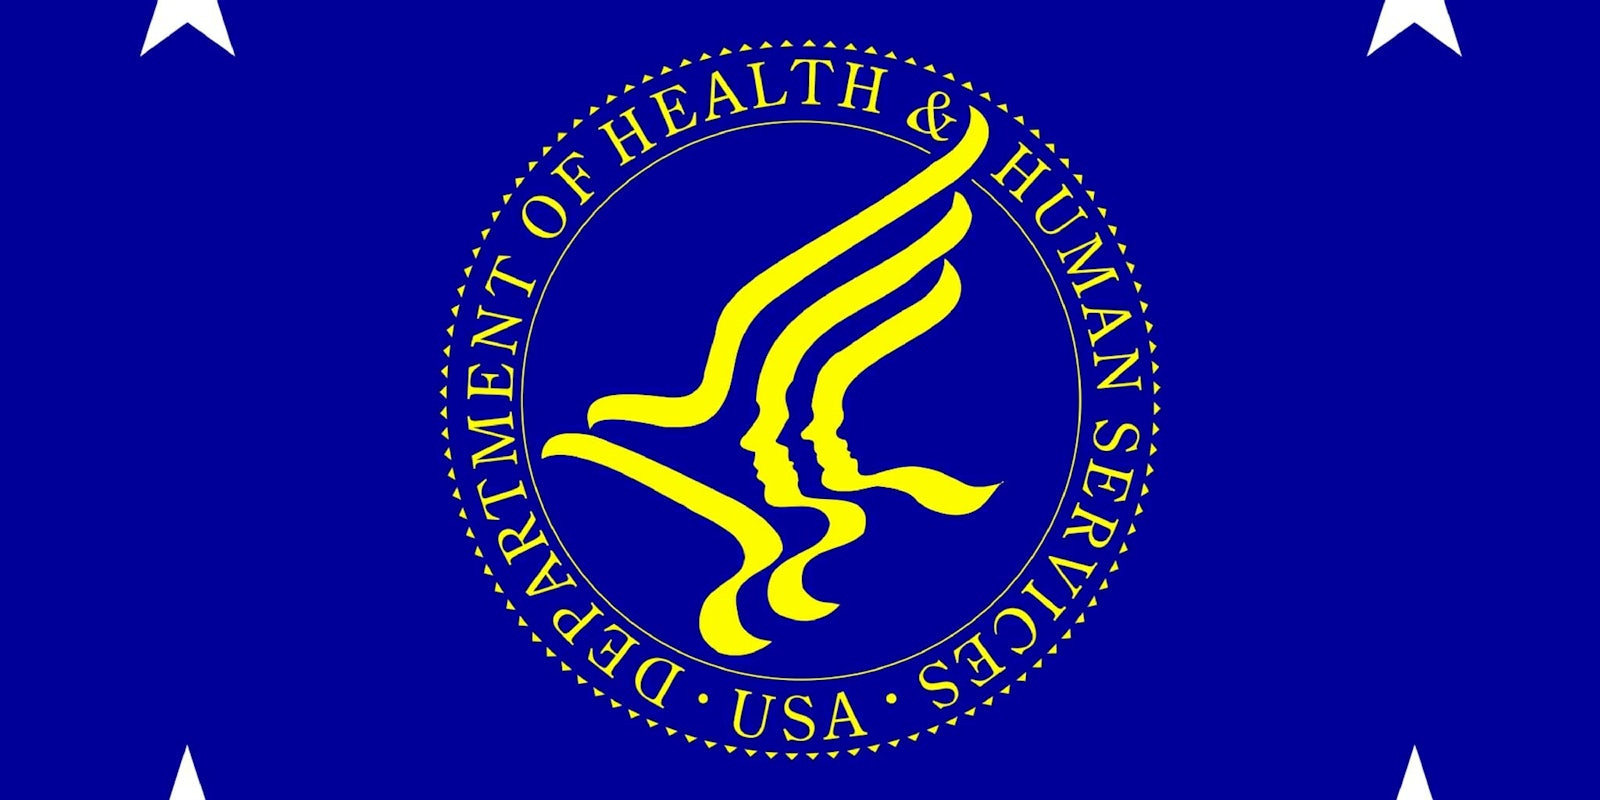 The flag of the United States Secretary of Health and Human Services.